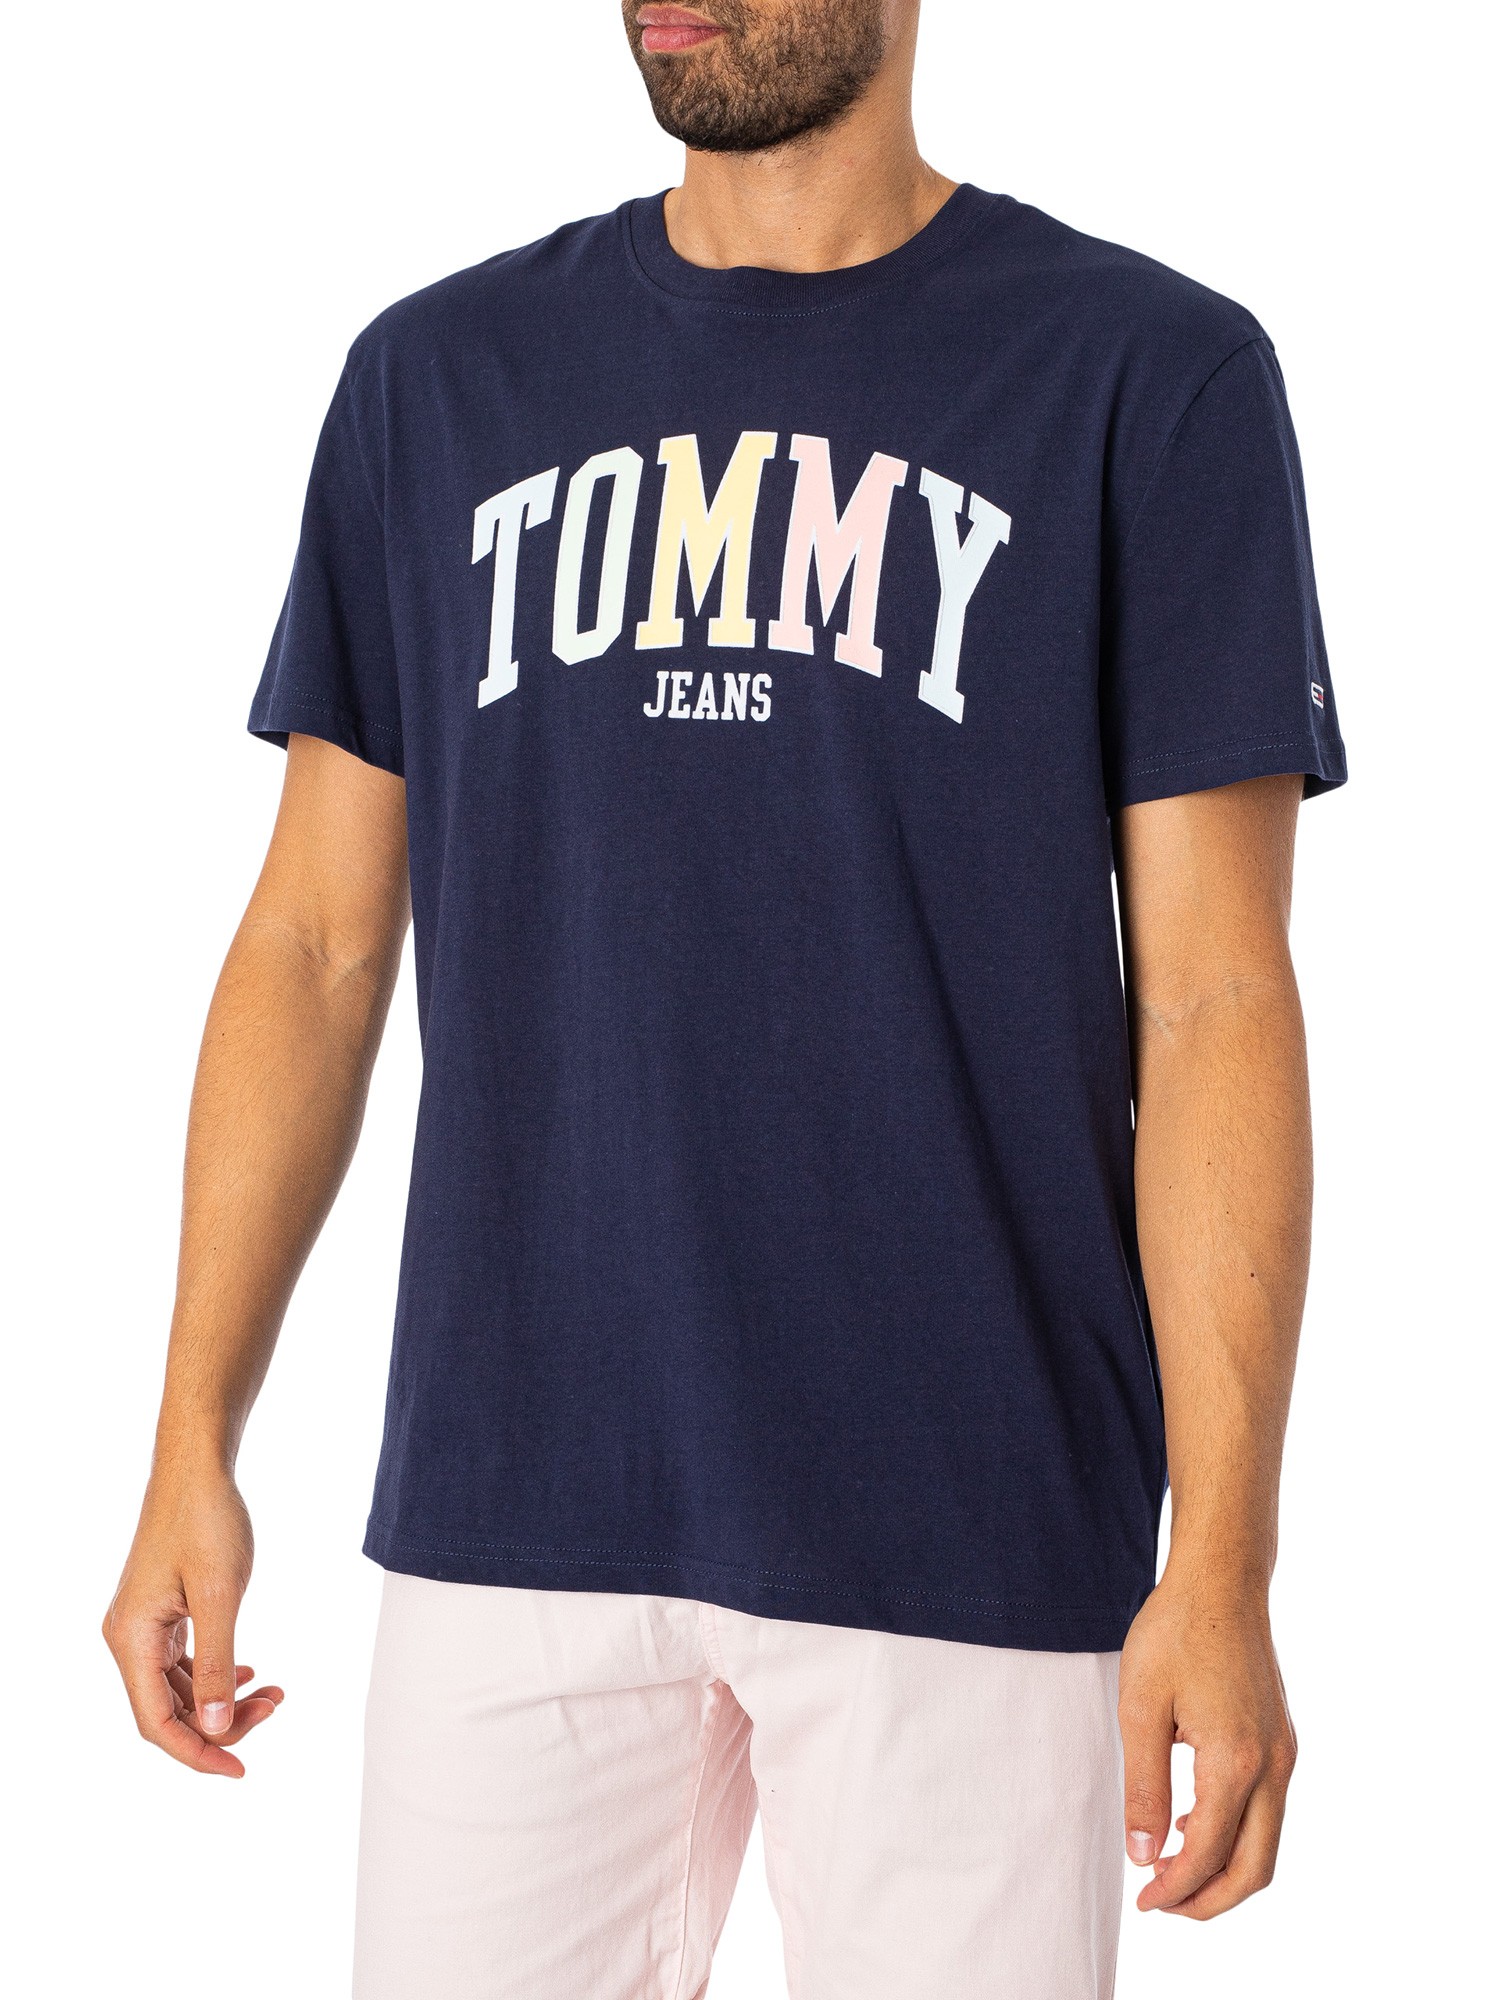 Tommy Jeans College Pop T-Shirt - Twilight Navy | Standout